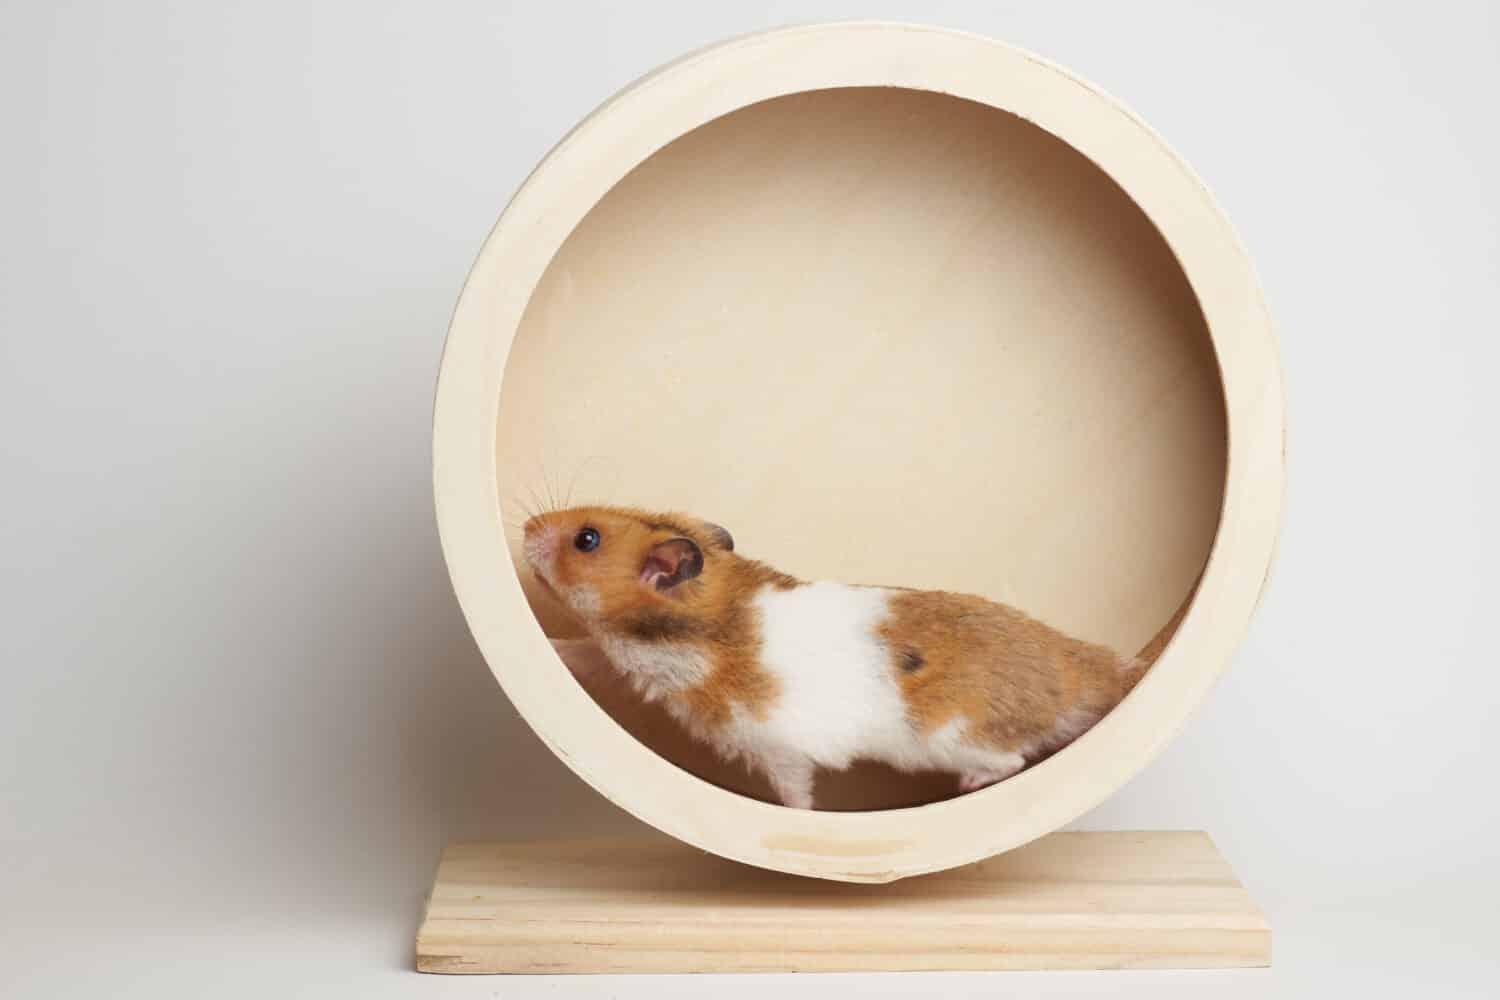 Syrian hamster play with an hamster wheel white background                  